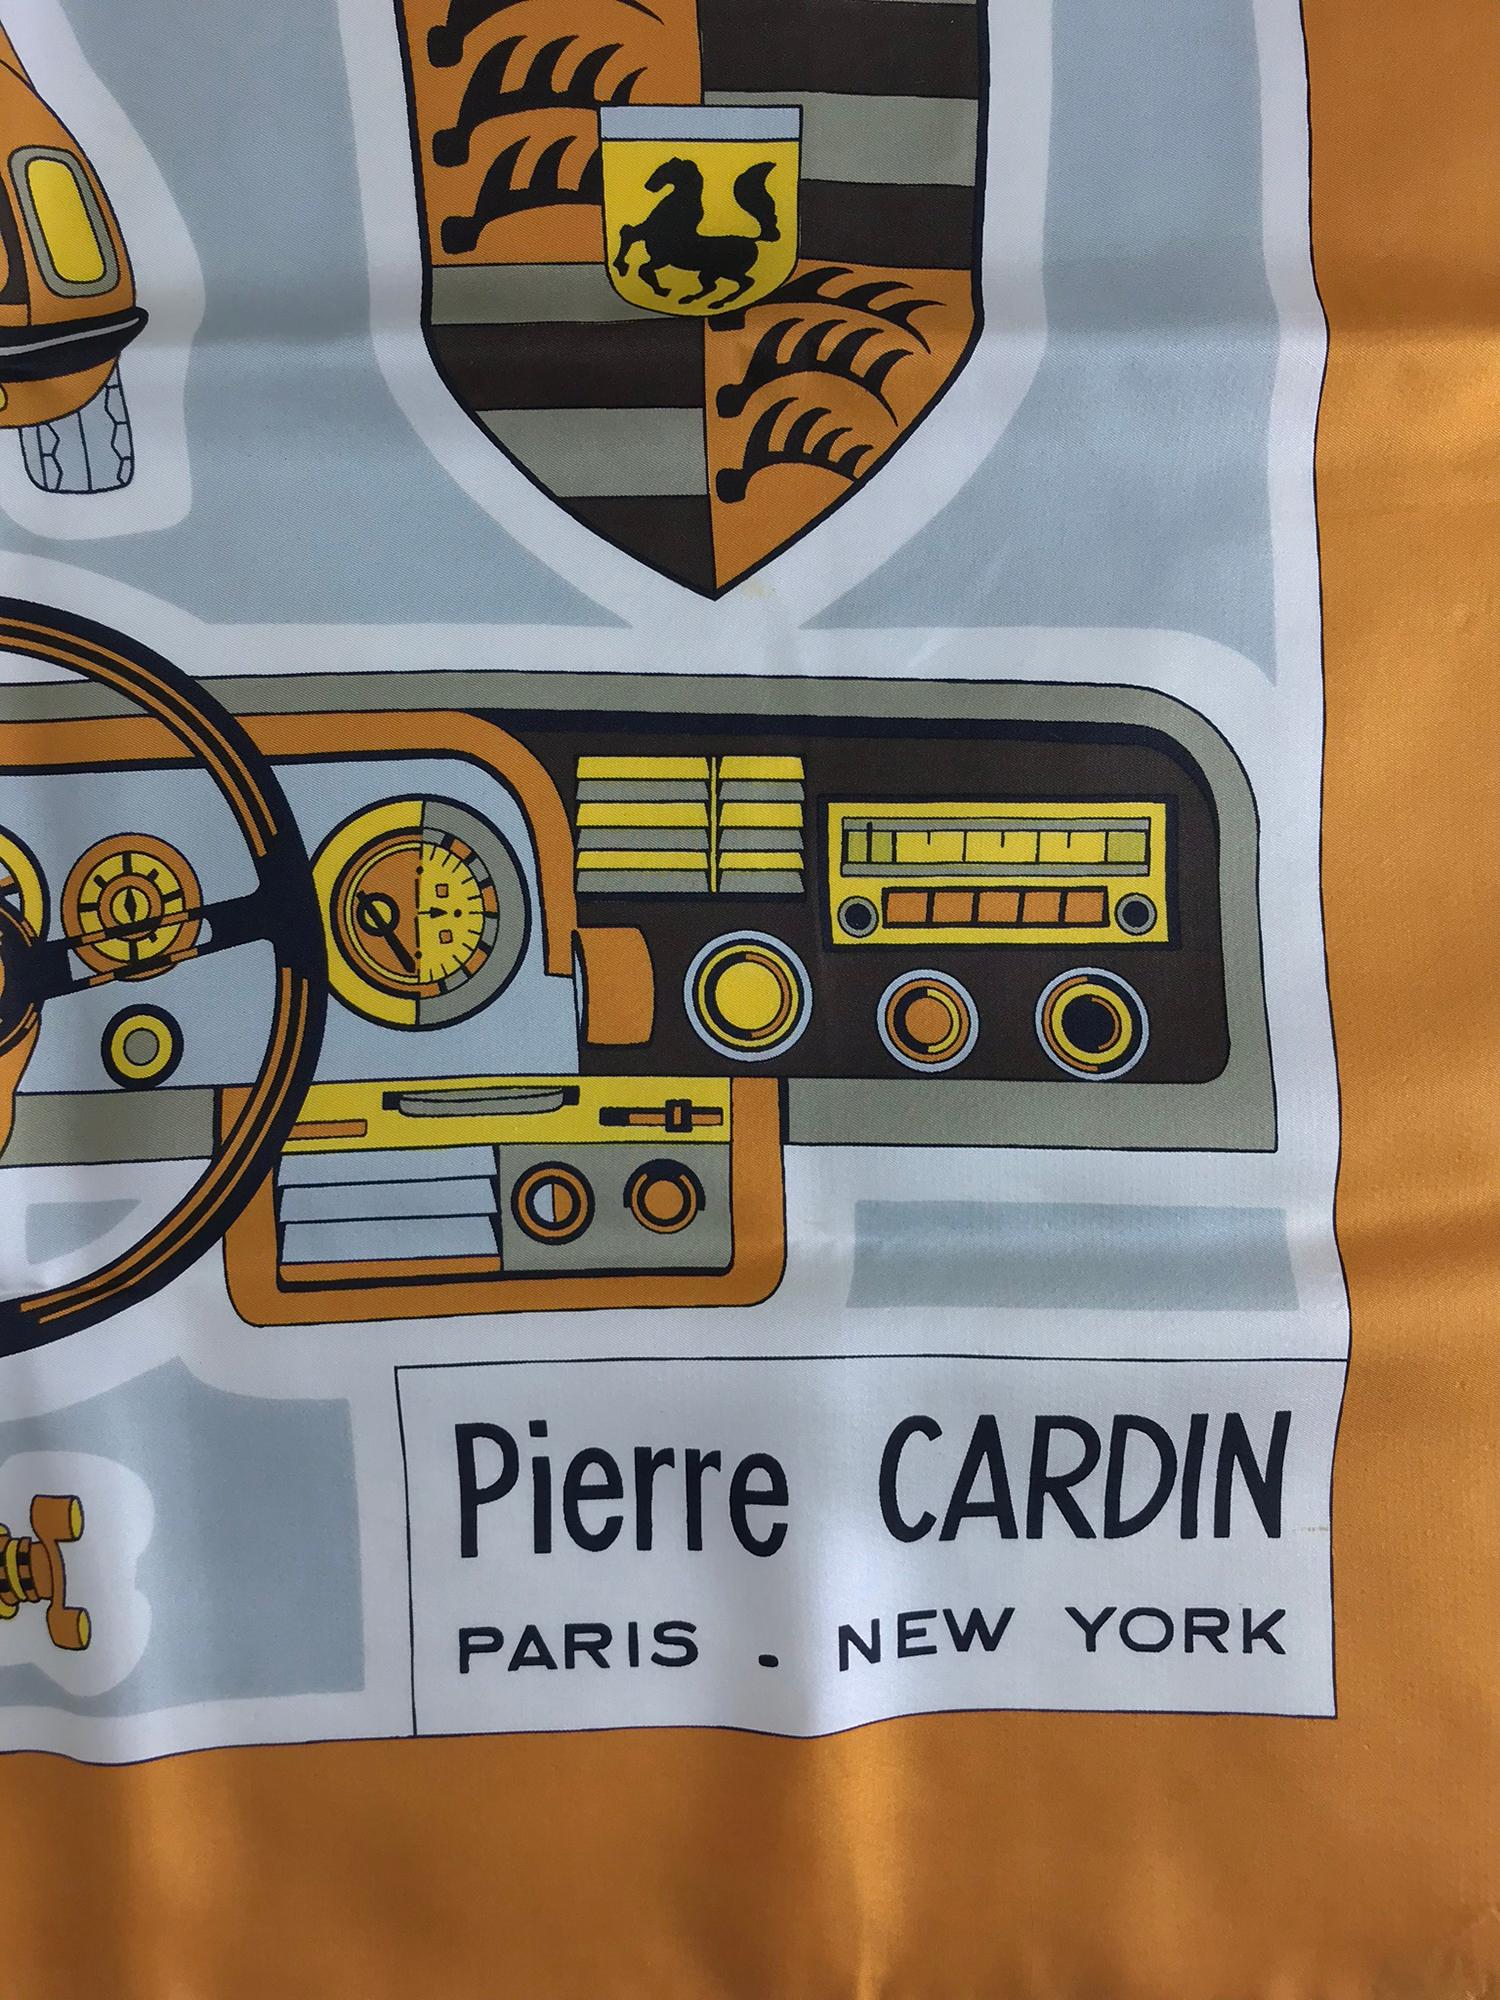 Pierre Cardin 1970s Porsche car silk scarf  from the 1970s. 26 x 26. In excellent condition. Rare.